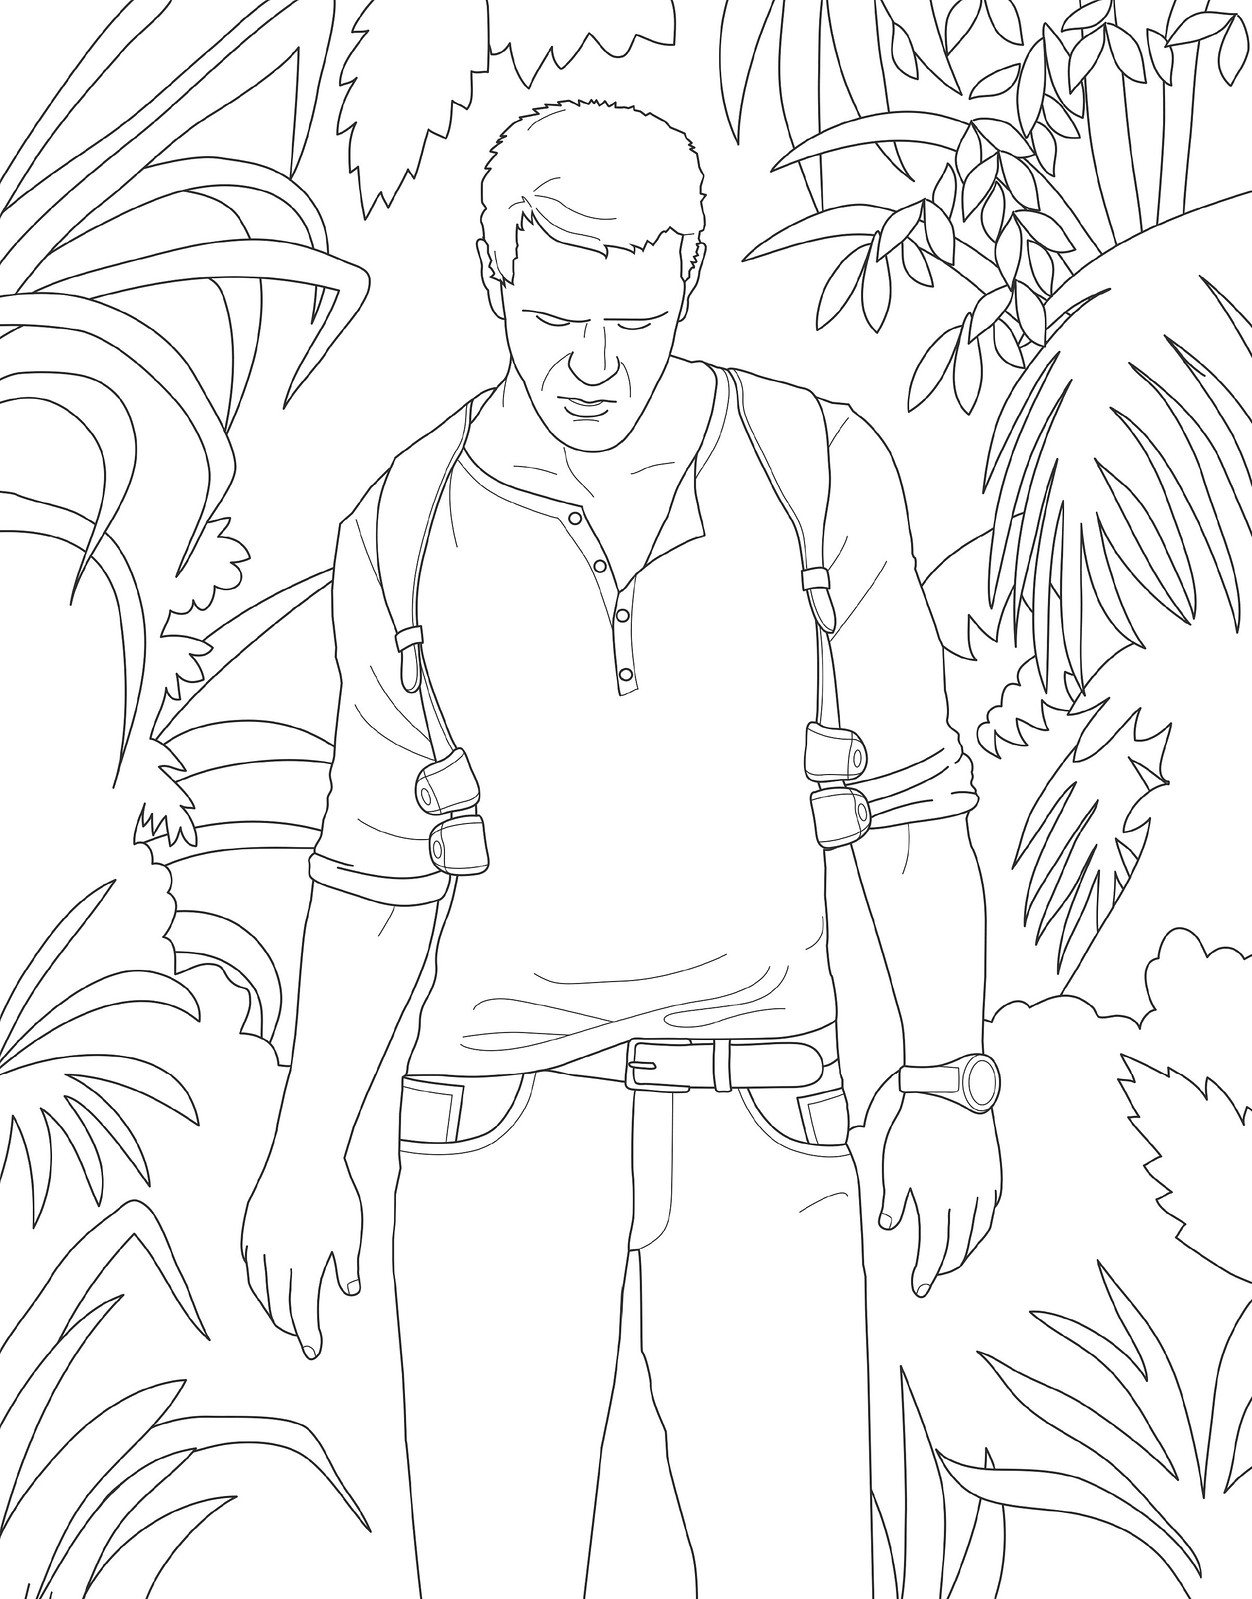 Get creative with PlayStation colouring book, Art For The Players ...